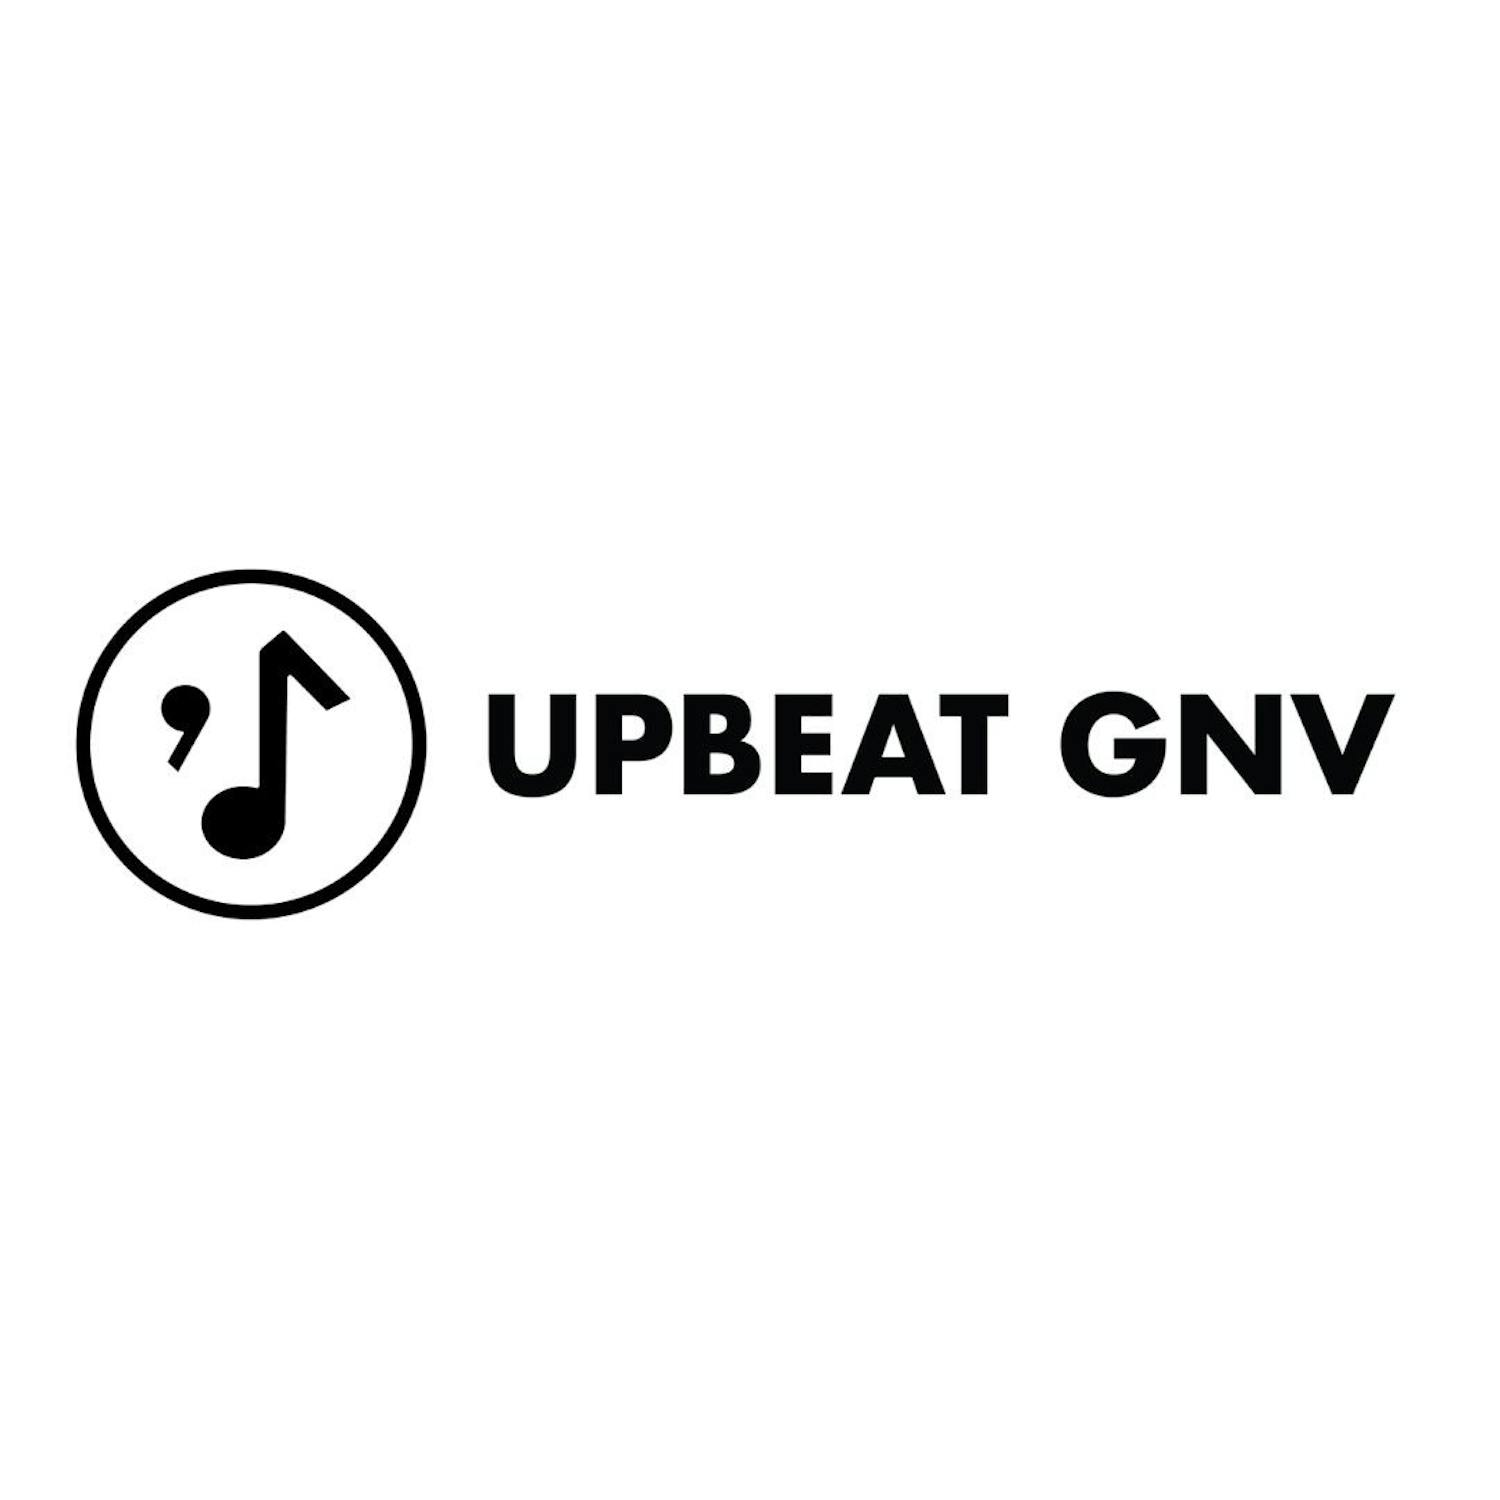 Alex Klausner, drummer for local band Rehasher, founded Upbeat GNV as a passion project amid the onset of the COVID-19 pandemic. 